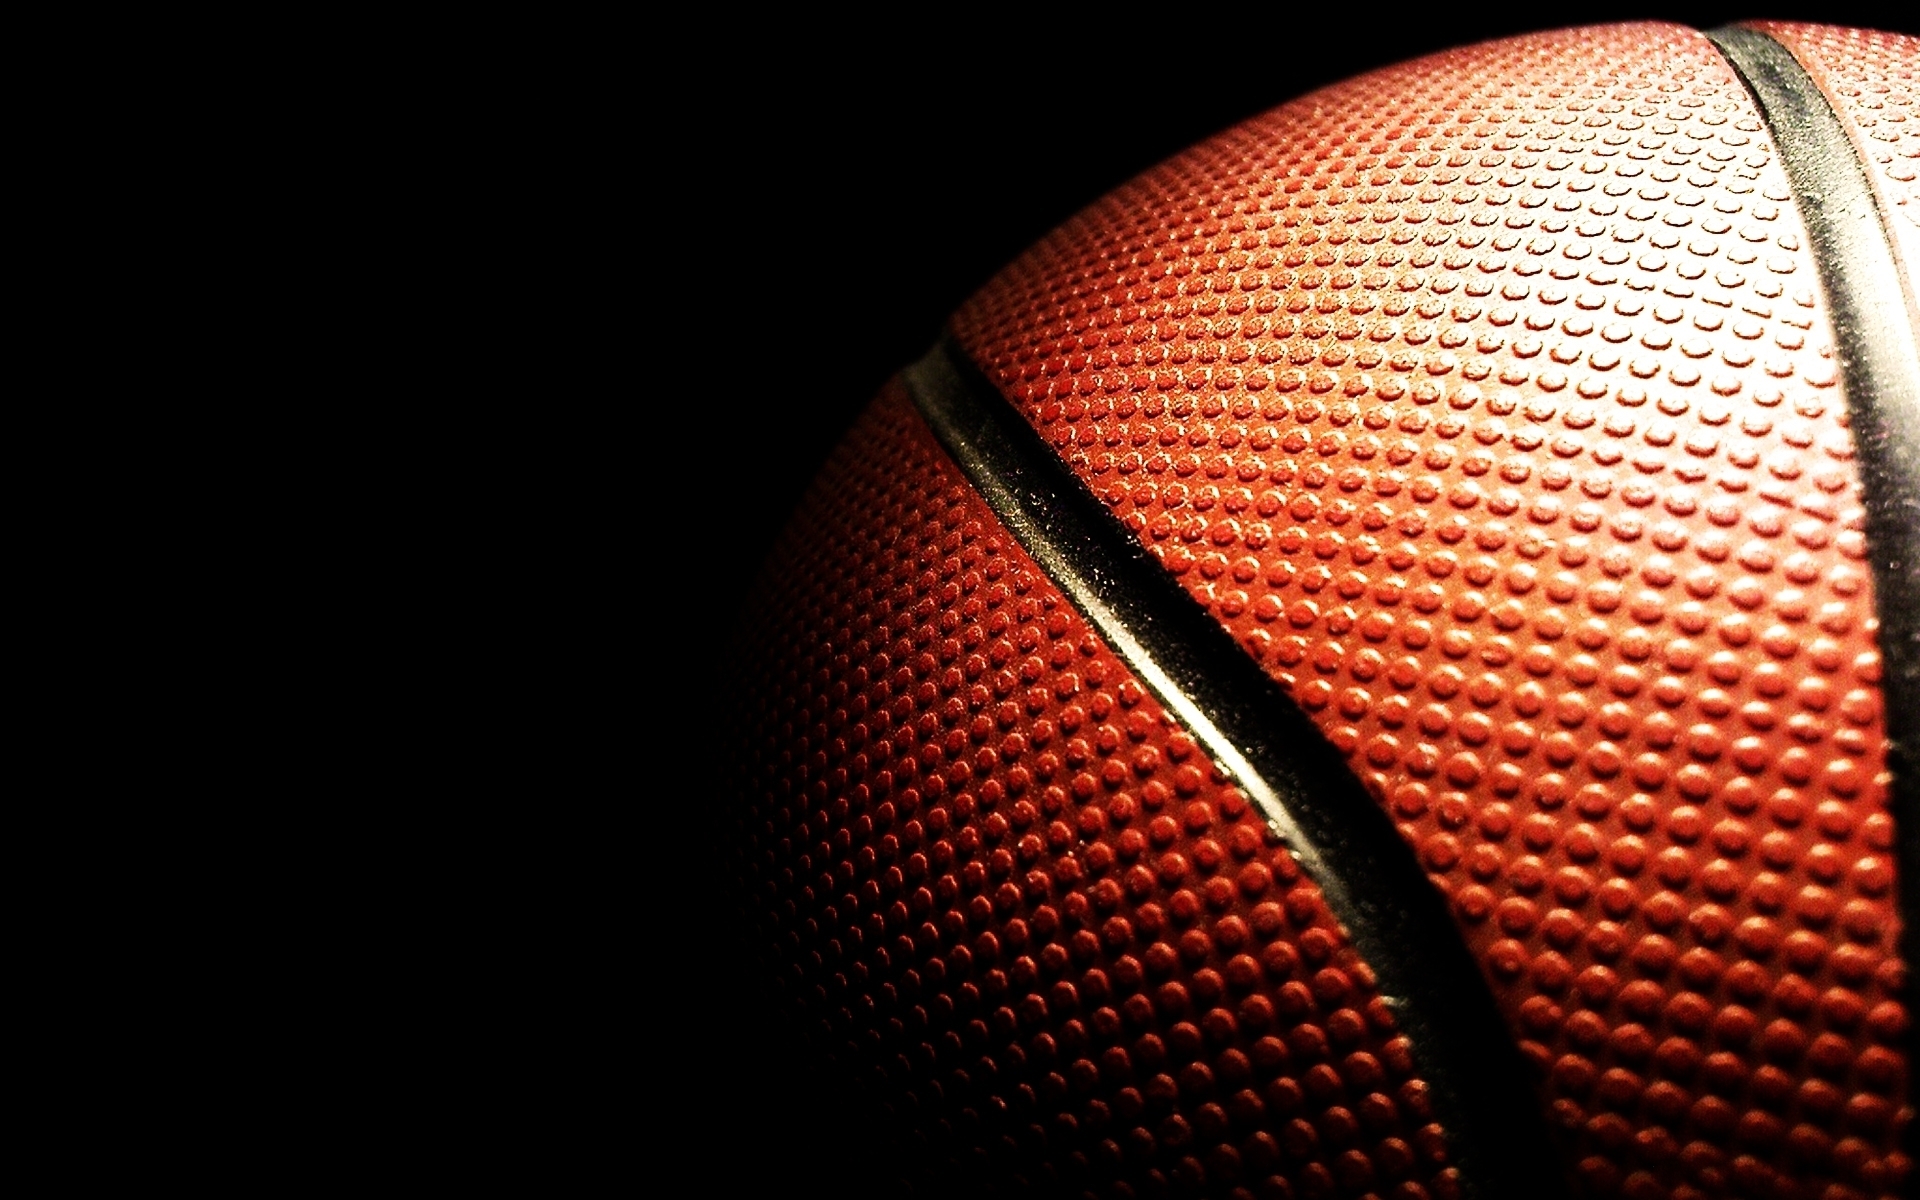 Basketball Wallpapers | Best Wallpapers